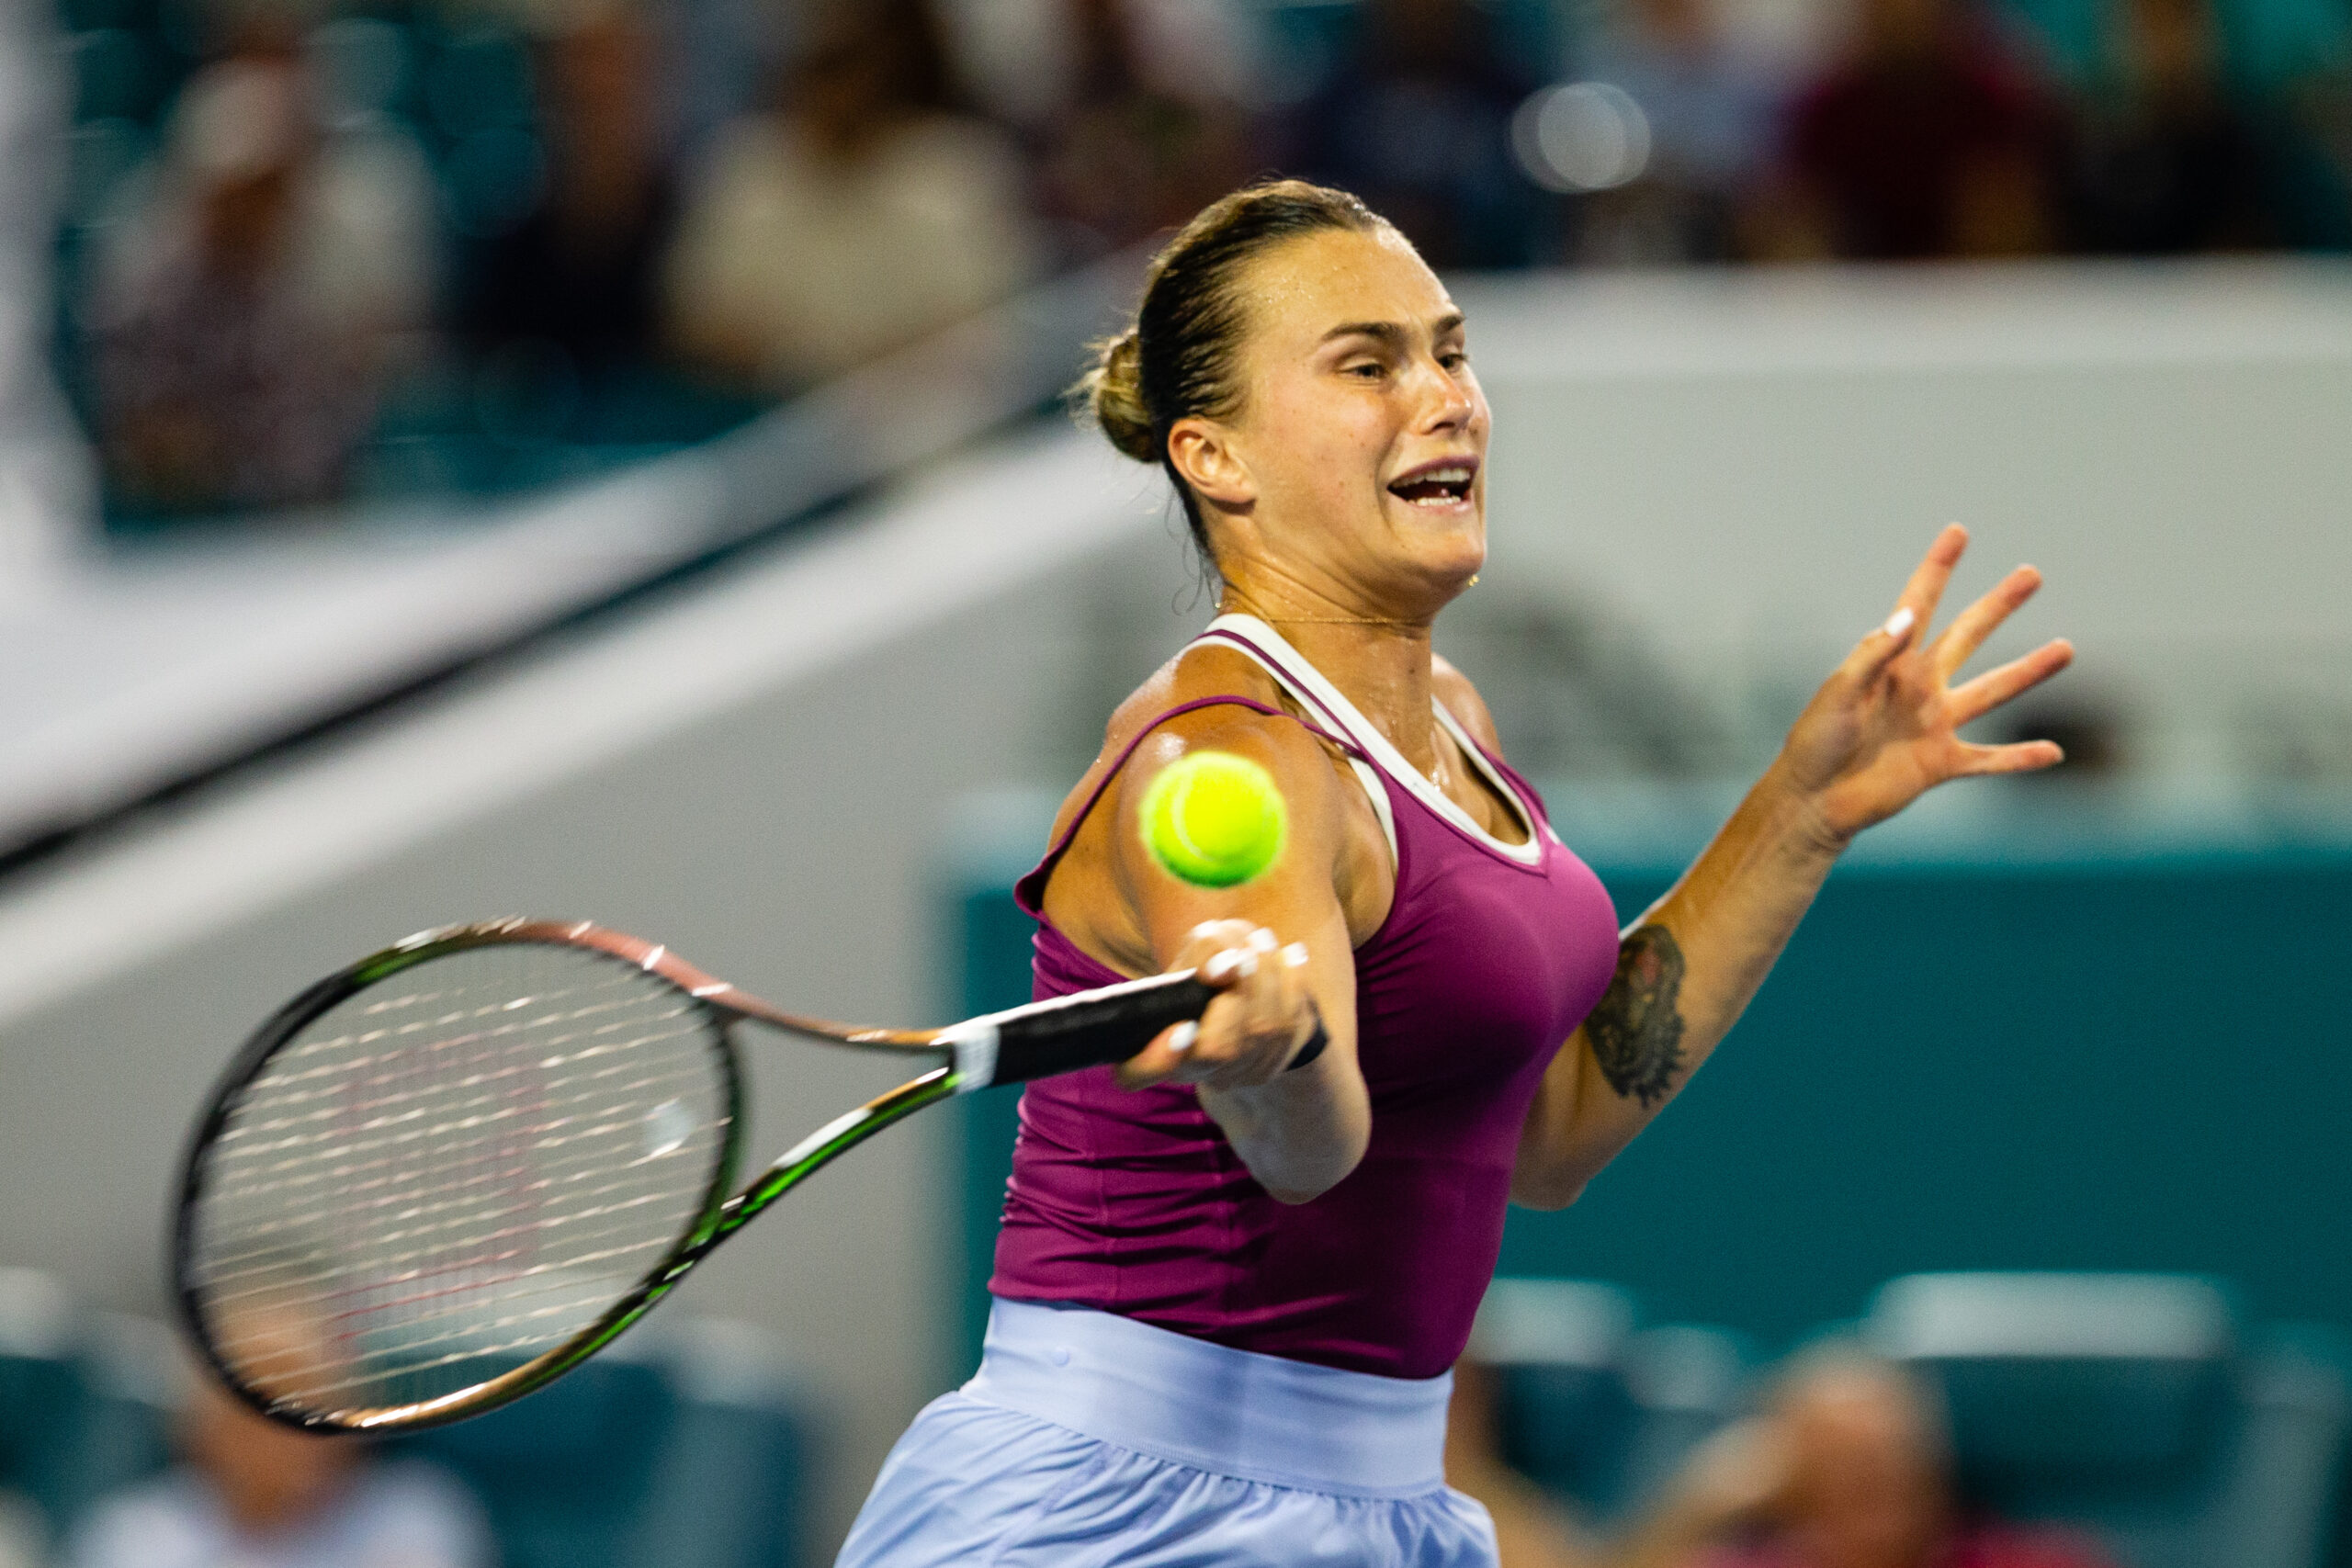 Aryna Sabalenka hits a forehand during her match with Marie Bouzkova on March 26 at the 2023 Miami Open